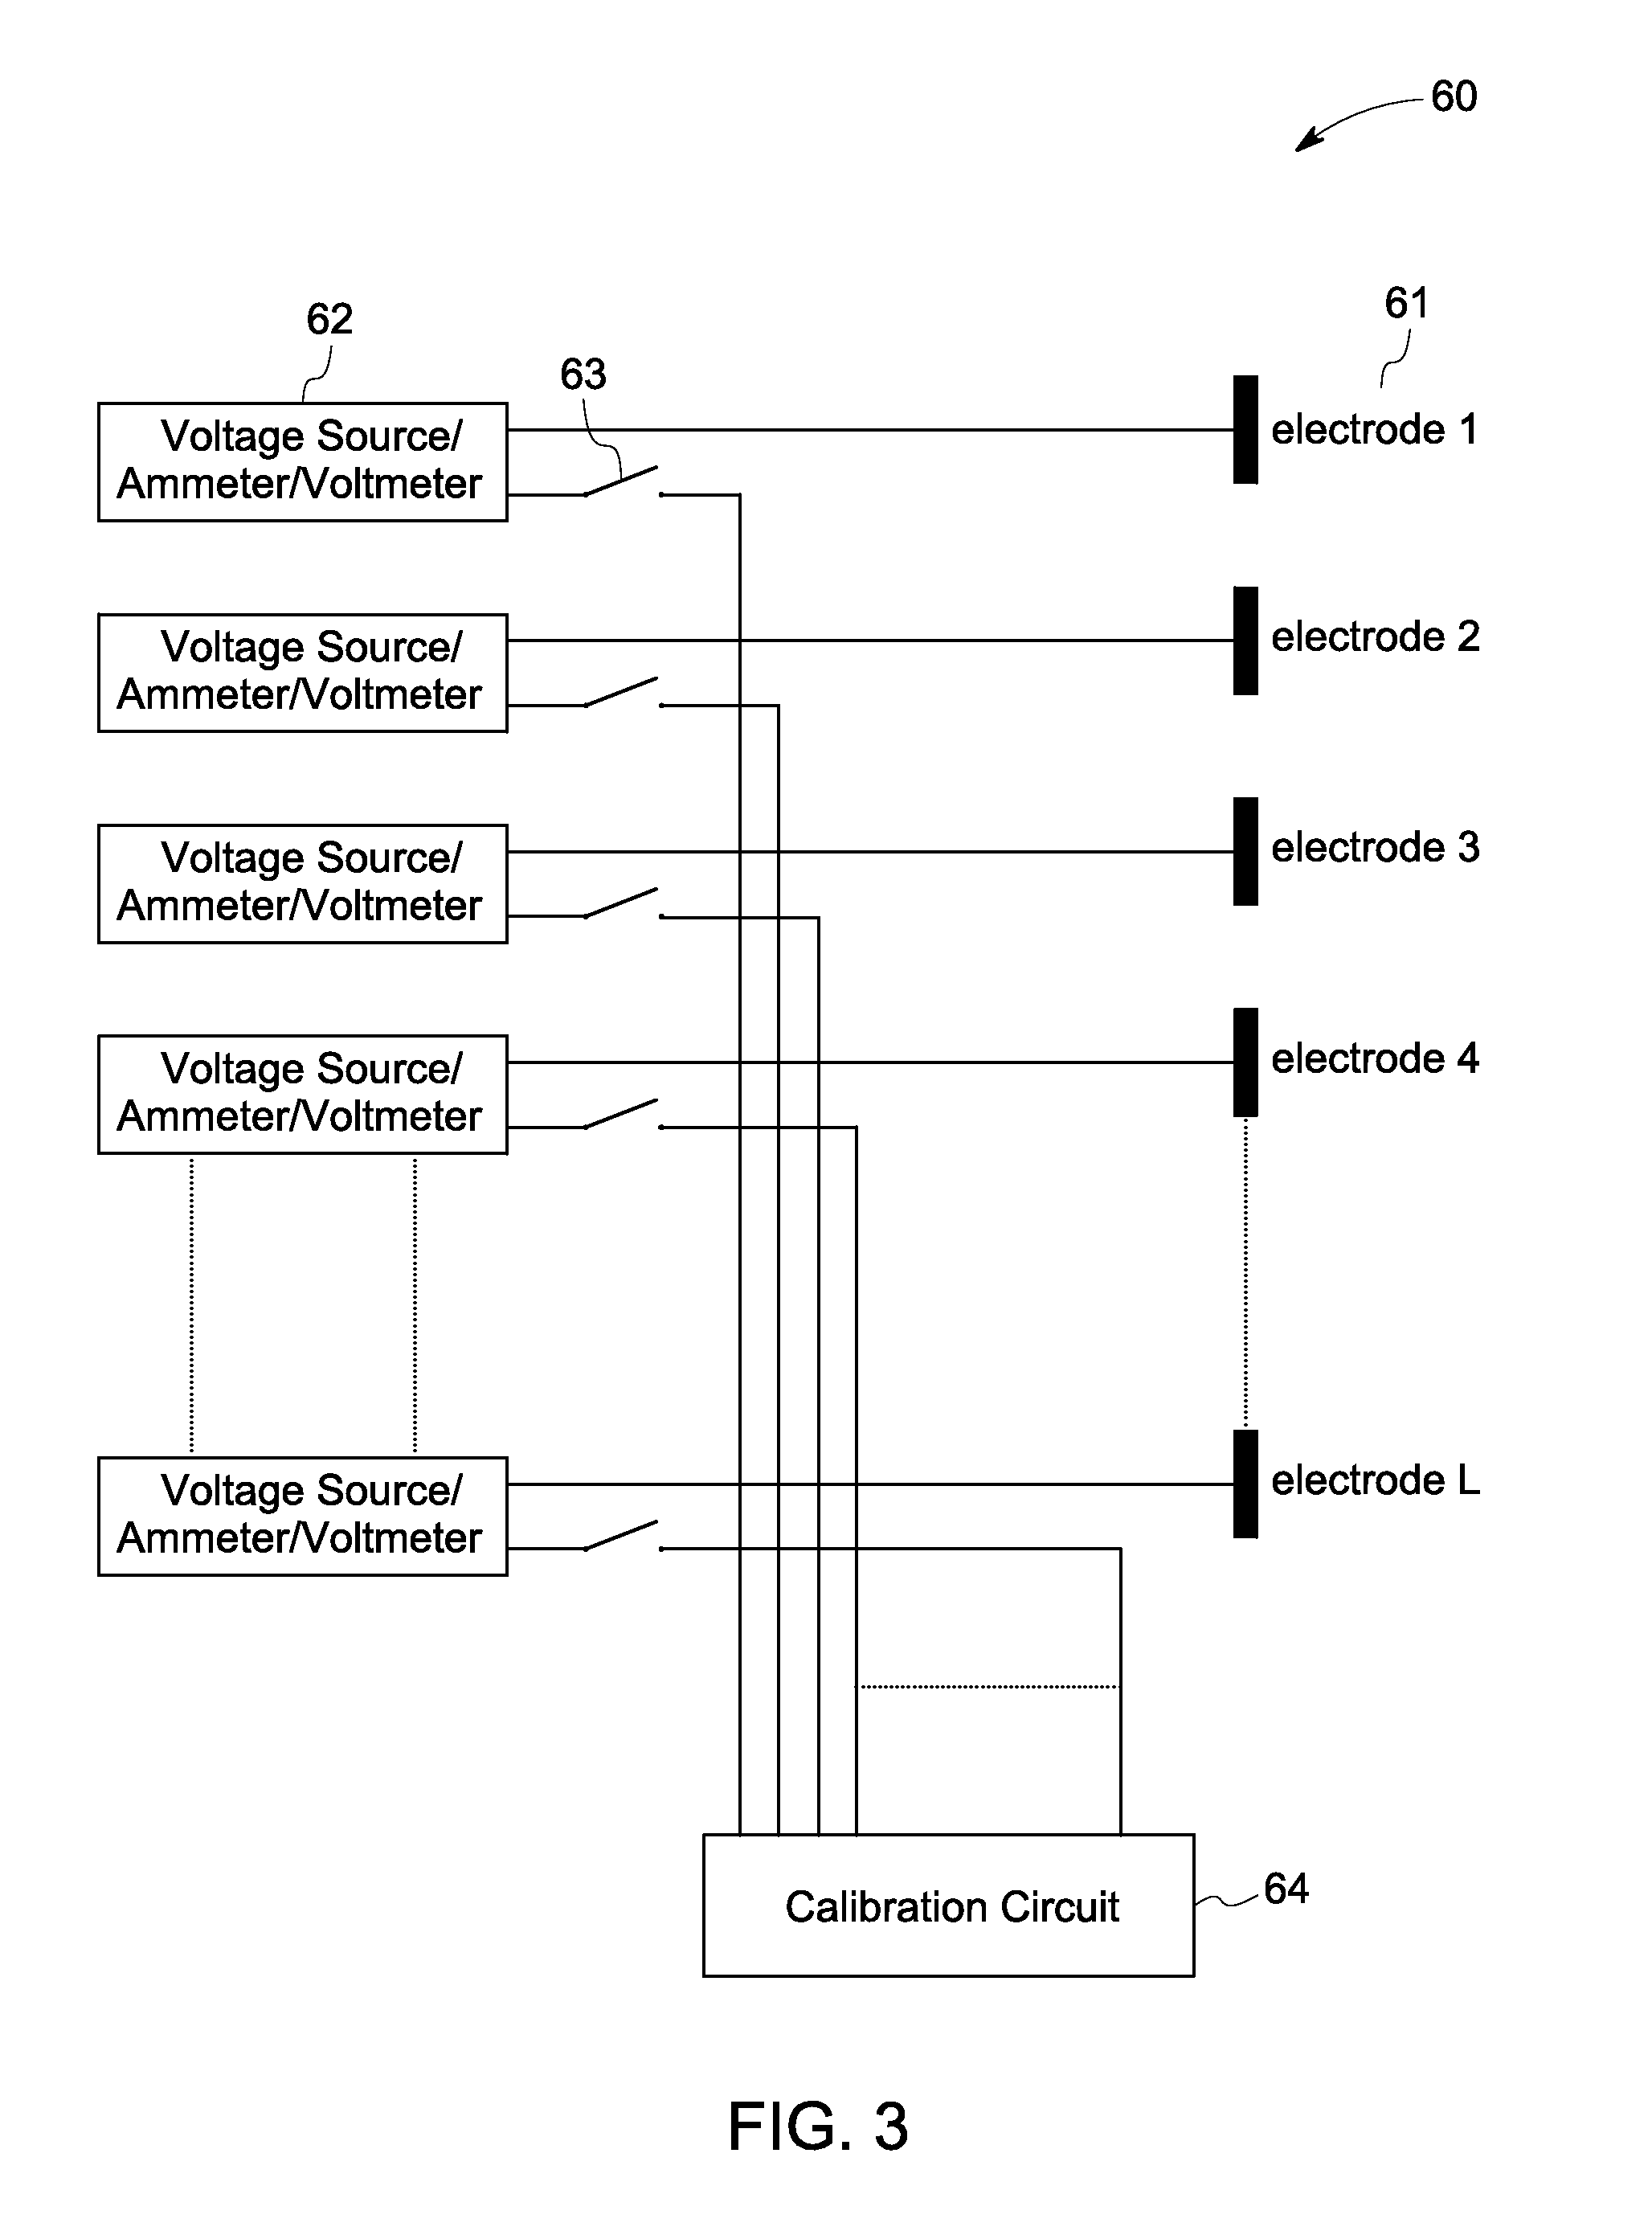 Electrical network representation of a distributed system